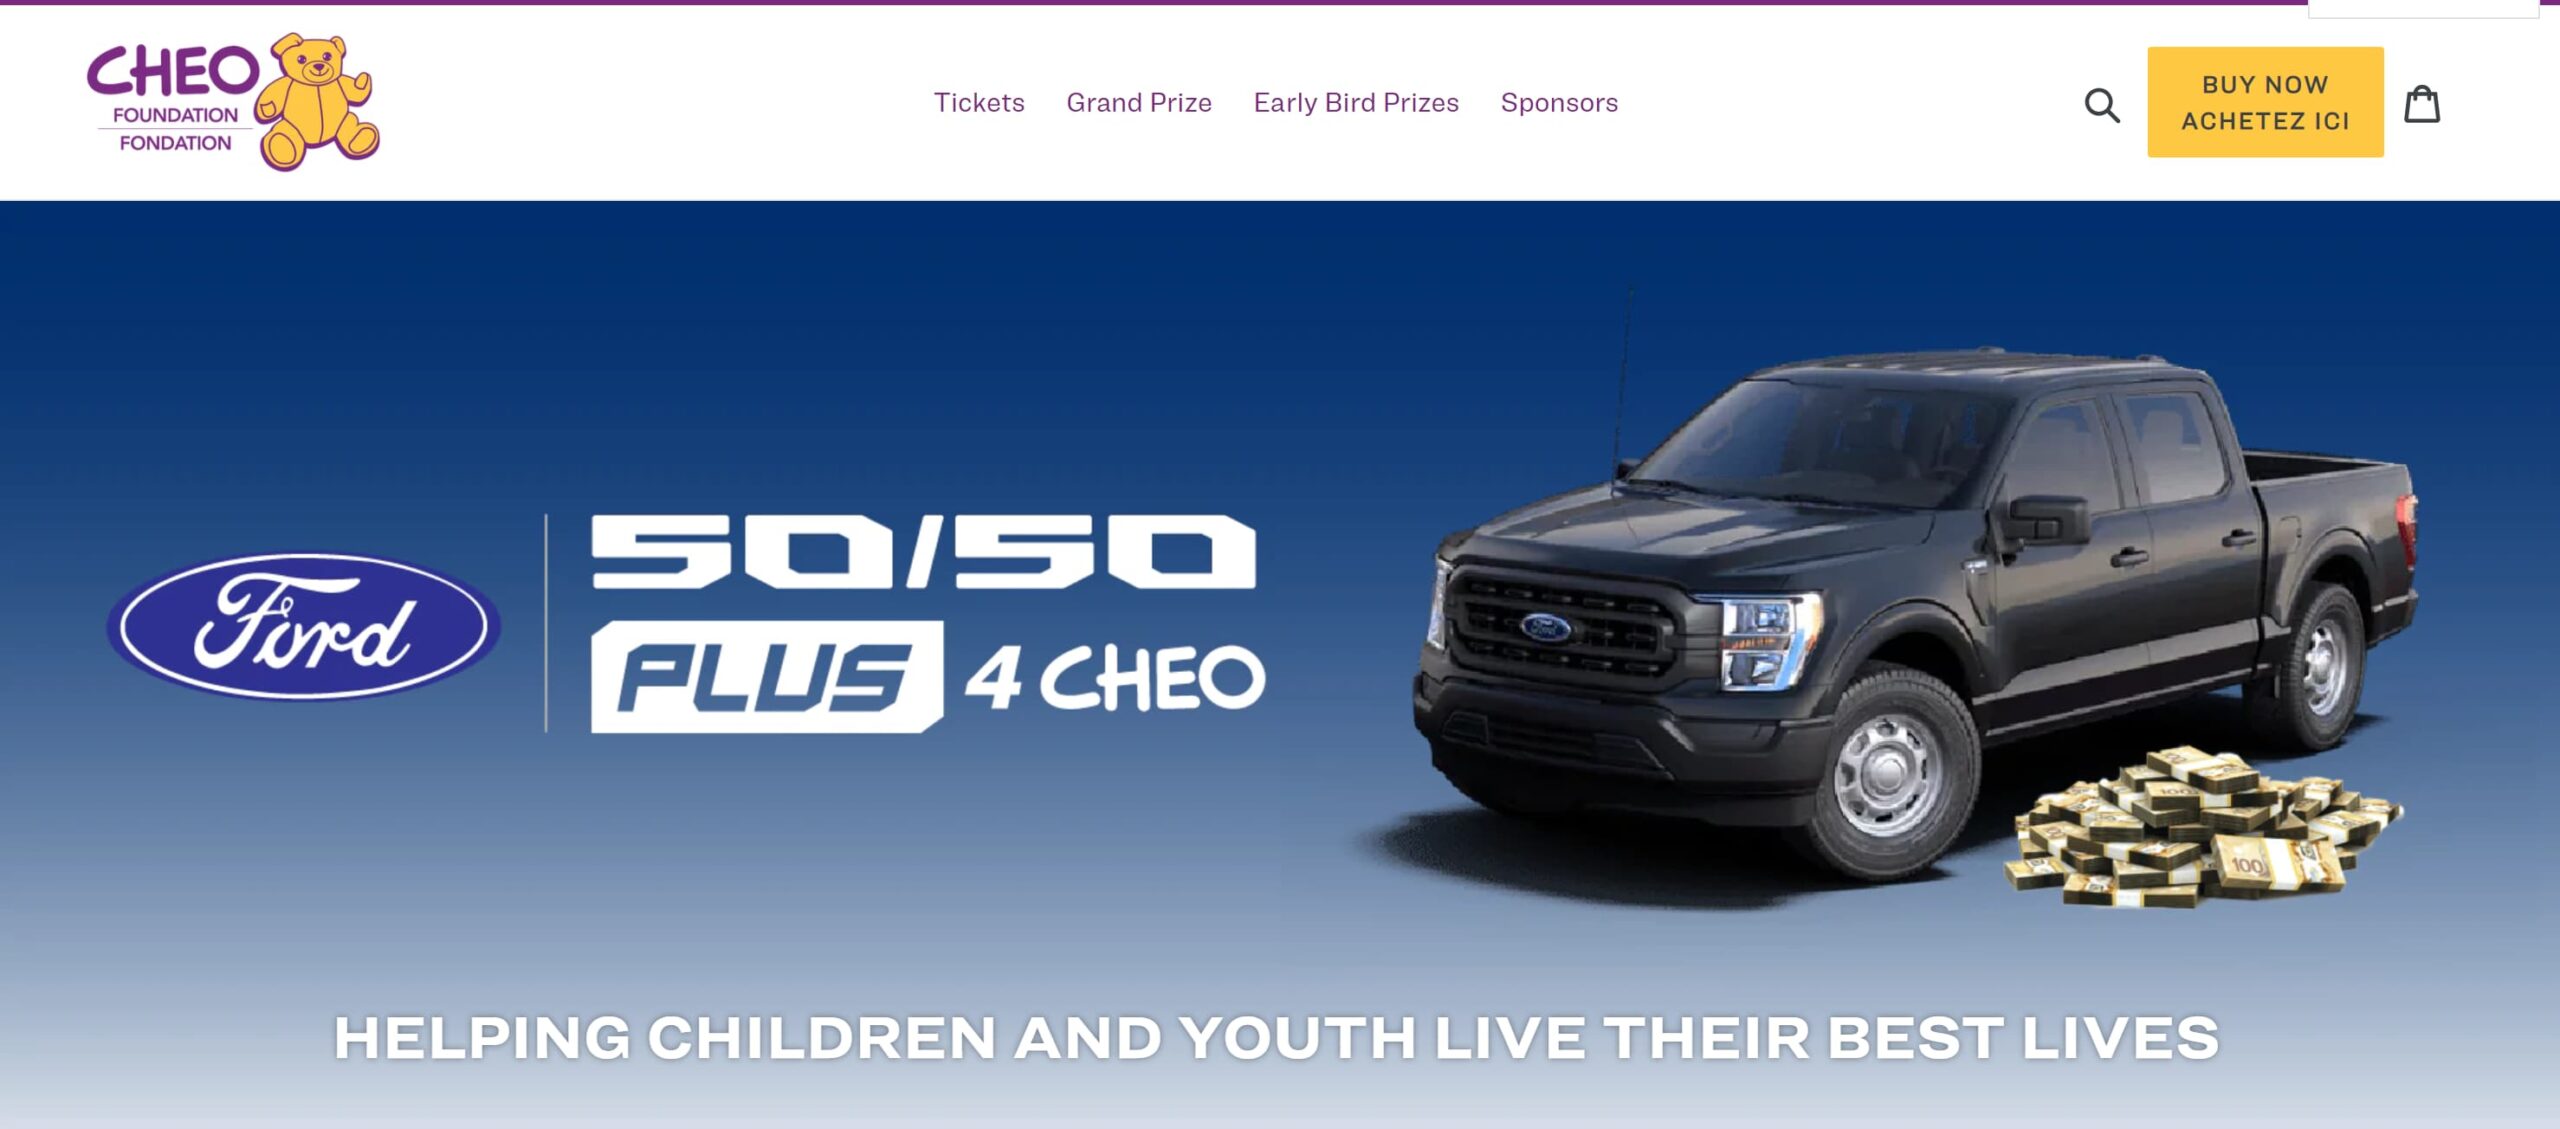 FORD 50/50 PLUS for CHEO Draw Announcement